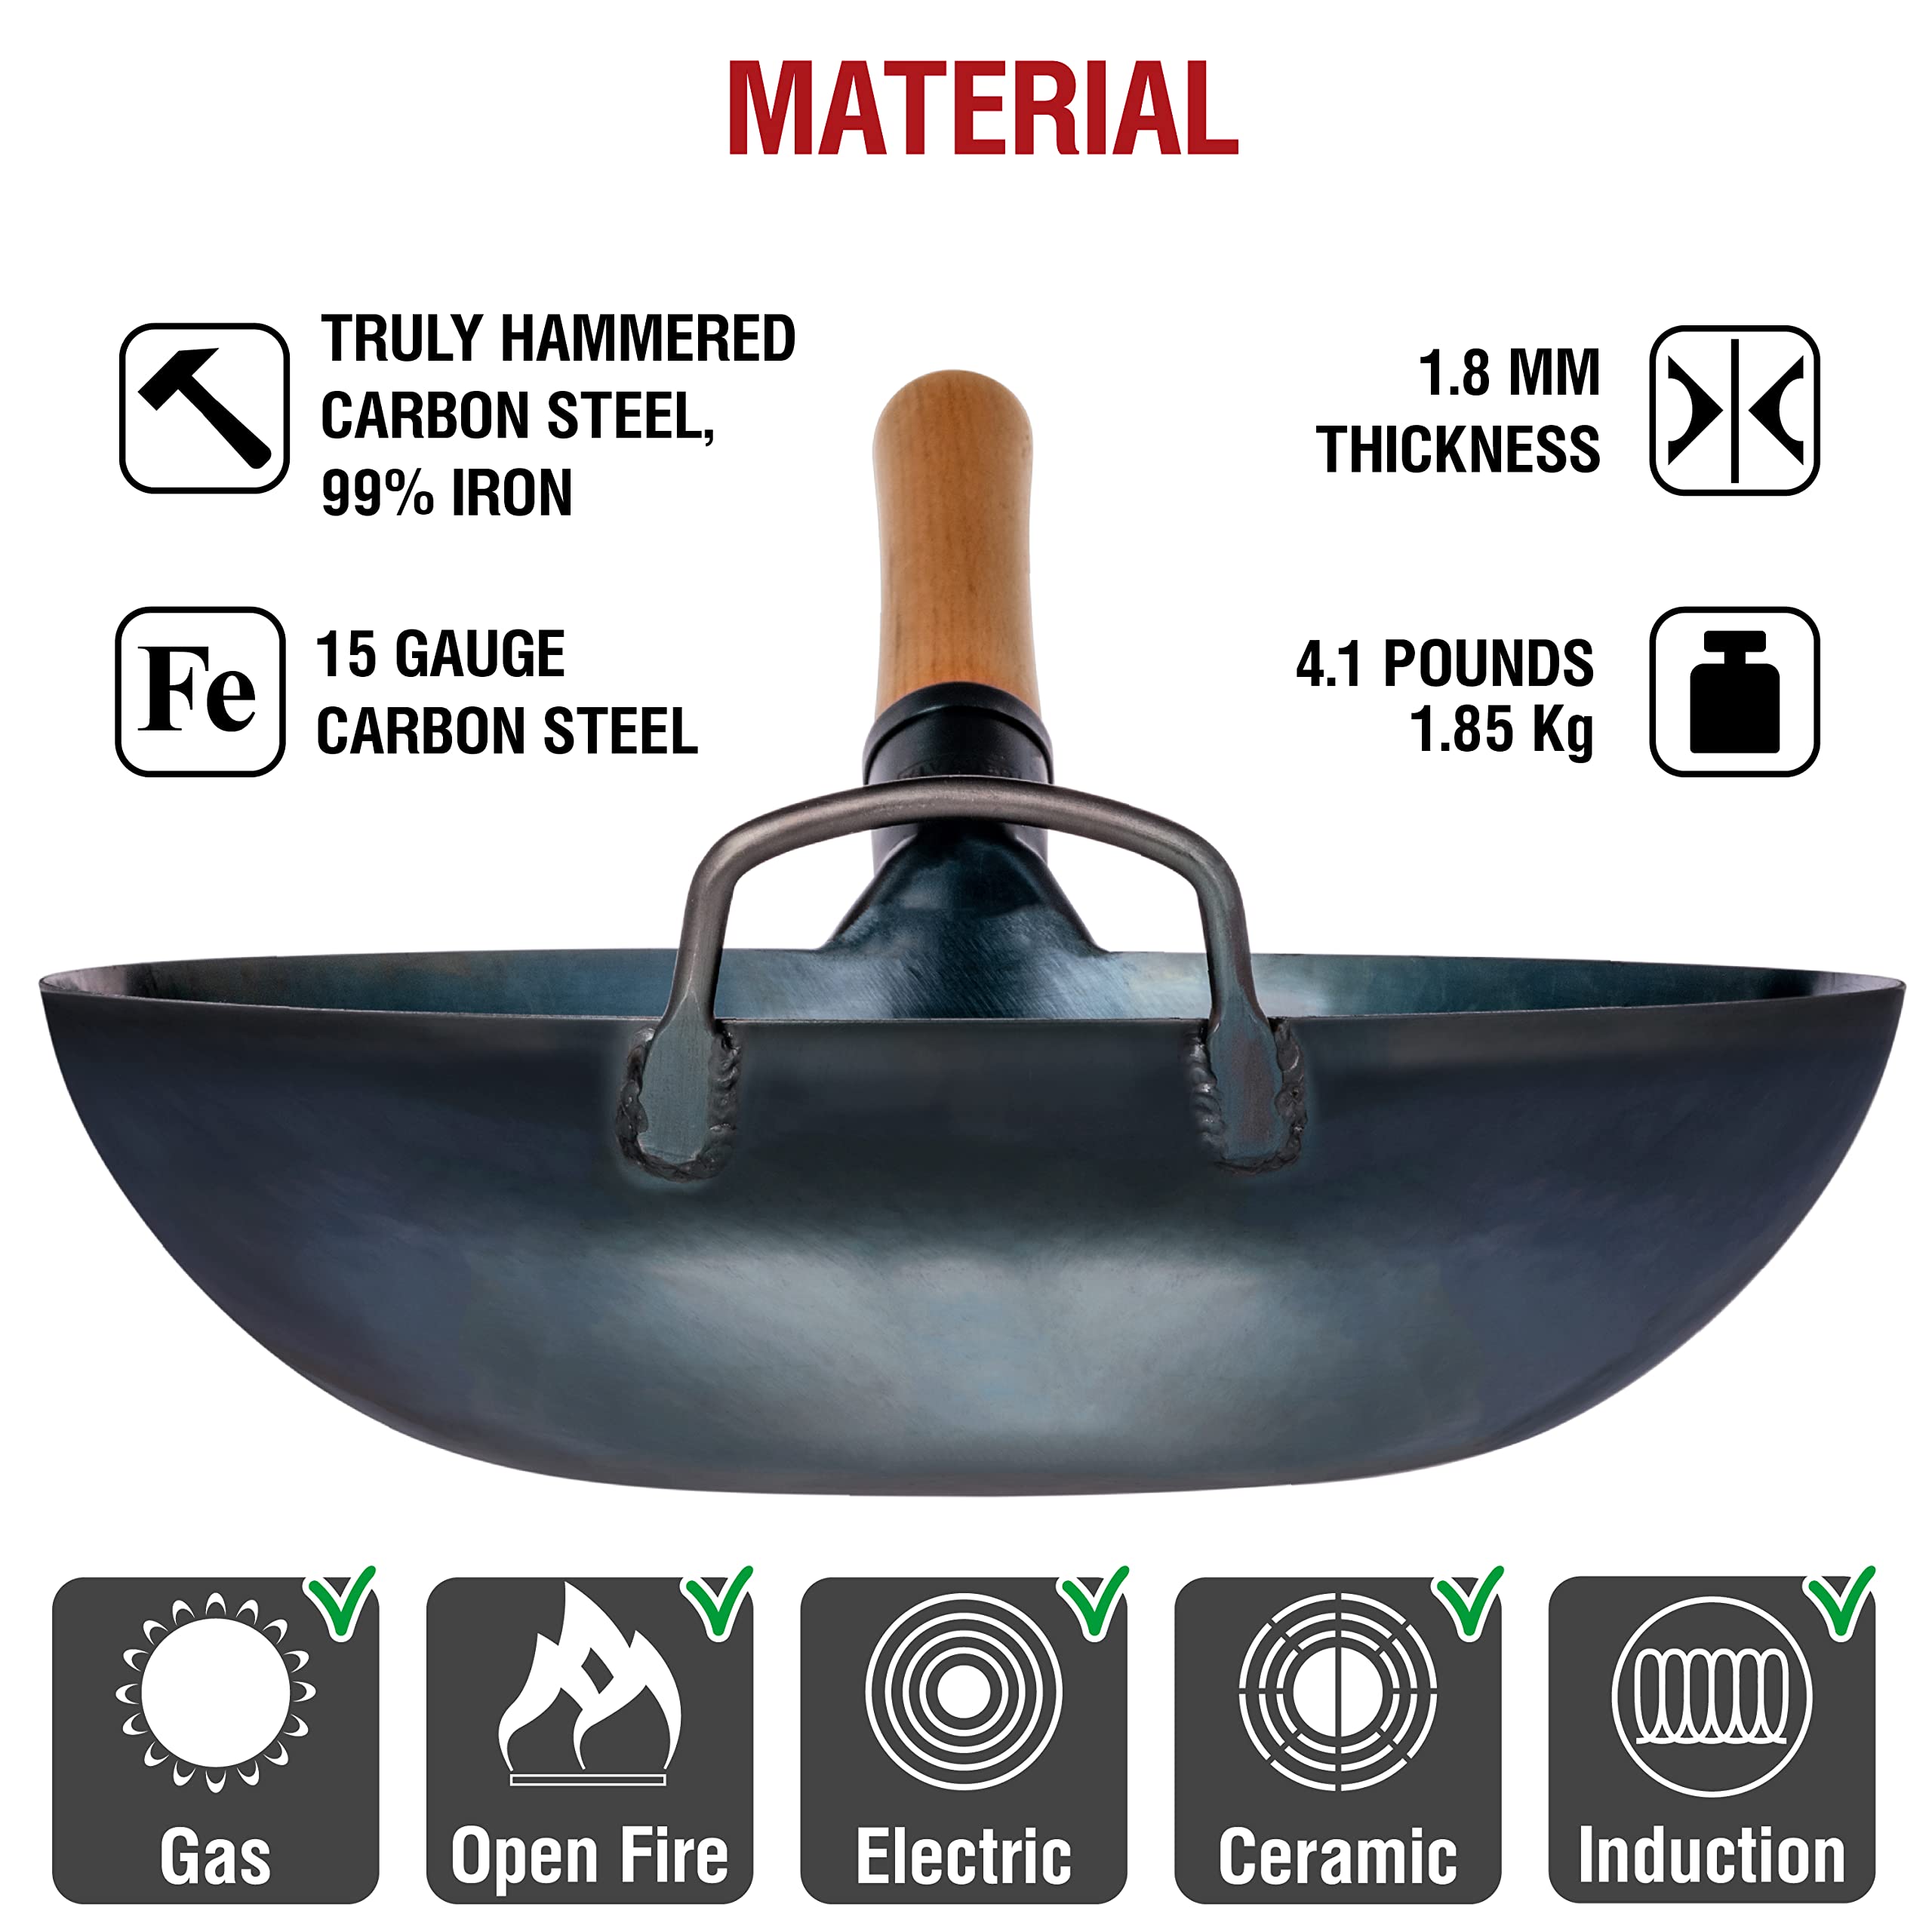 YOSUKATA Flat Bottom Wok Pan - 13.5" Blue Carbon Steel Wok - Preseasoned Carbon Steel Skillet - Traditional Japanese Cookware for Electric Induction Cooktops Woks and Stir Fry Pans